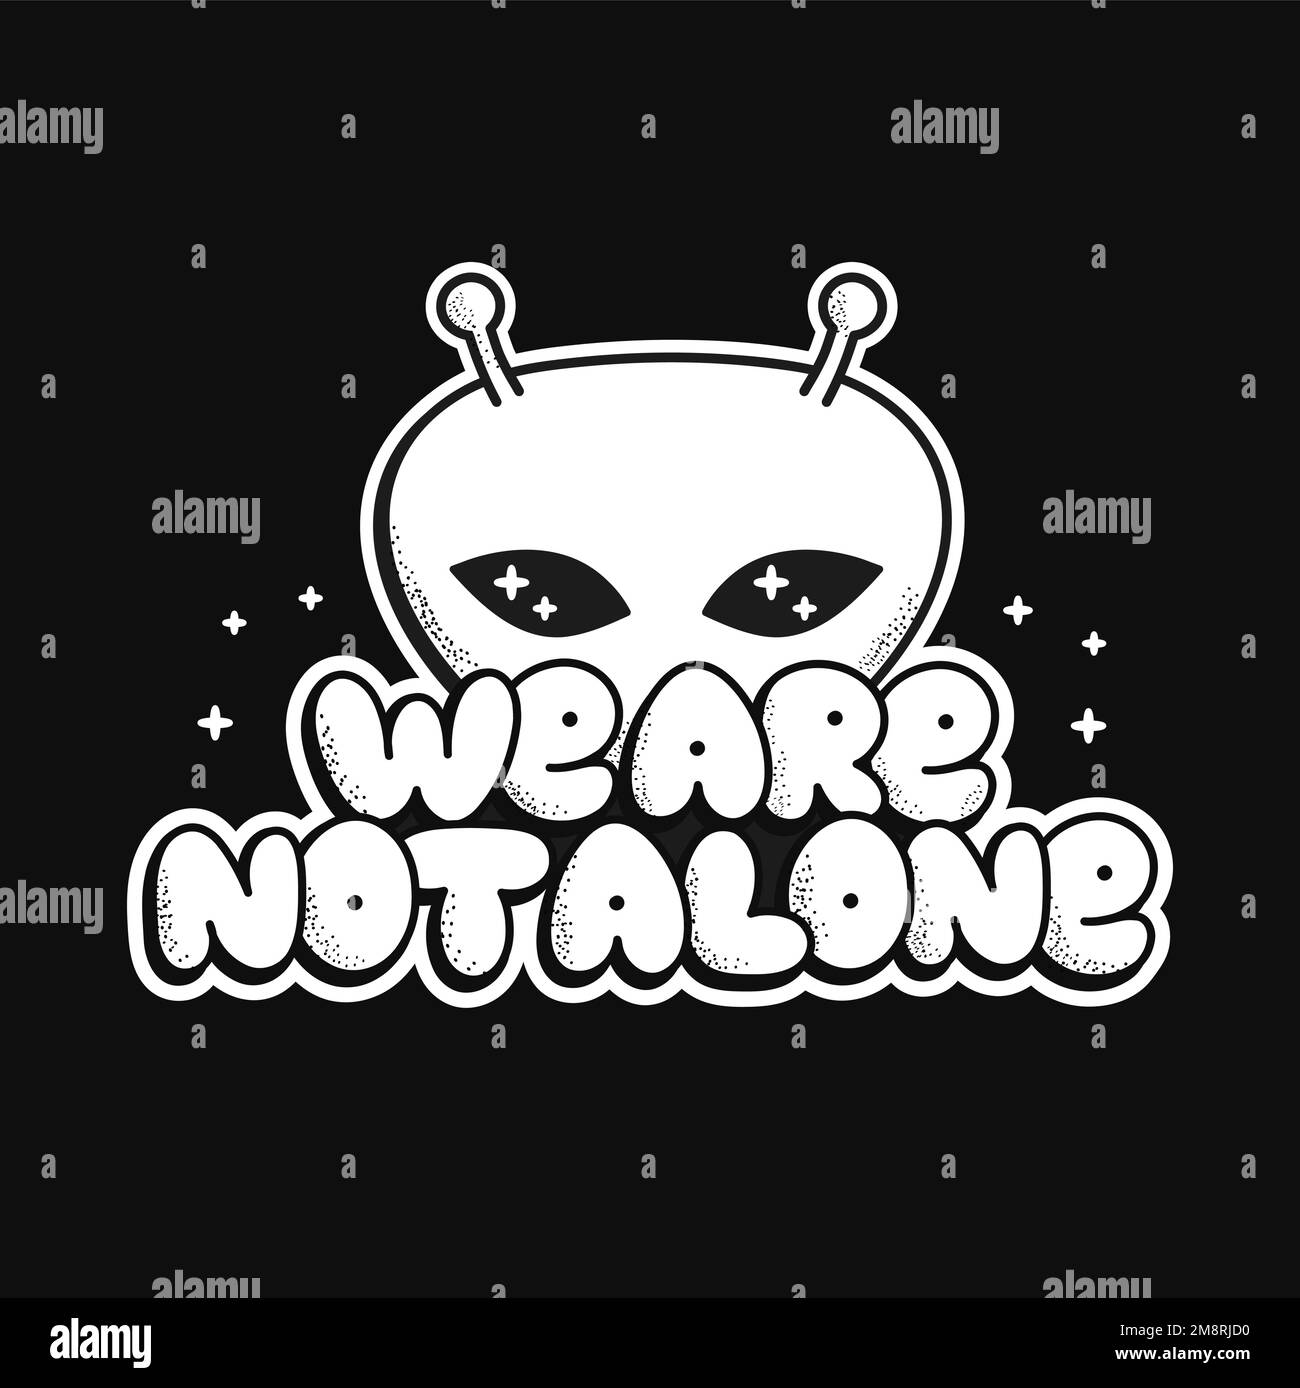 Ufo alien print for t-shirt art. We are not alone quote. Vector line doodle cartoon graphic illustration logo design.Ufo,alien,text phrase print for poster, t-shirt concept Stock Vector